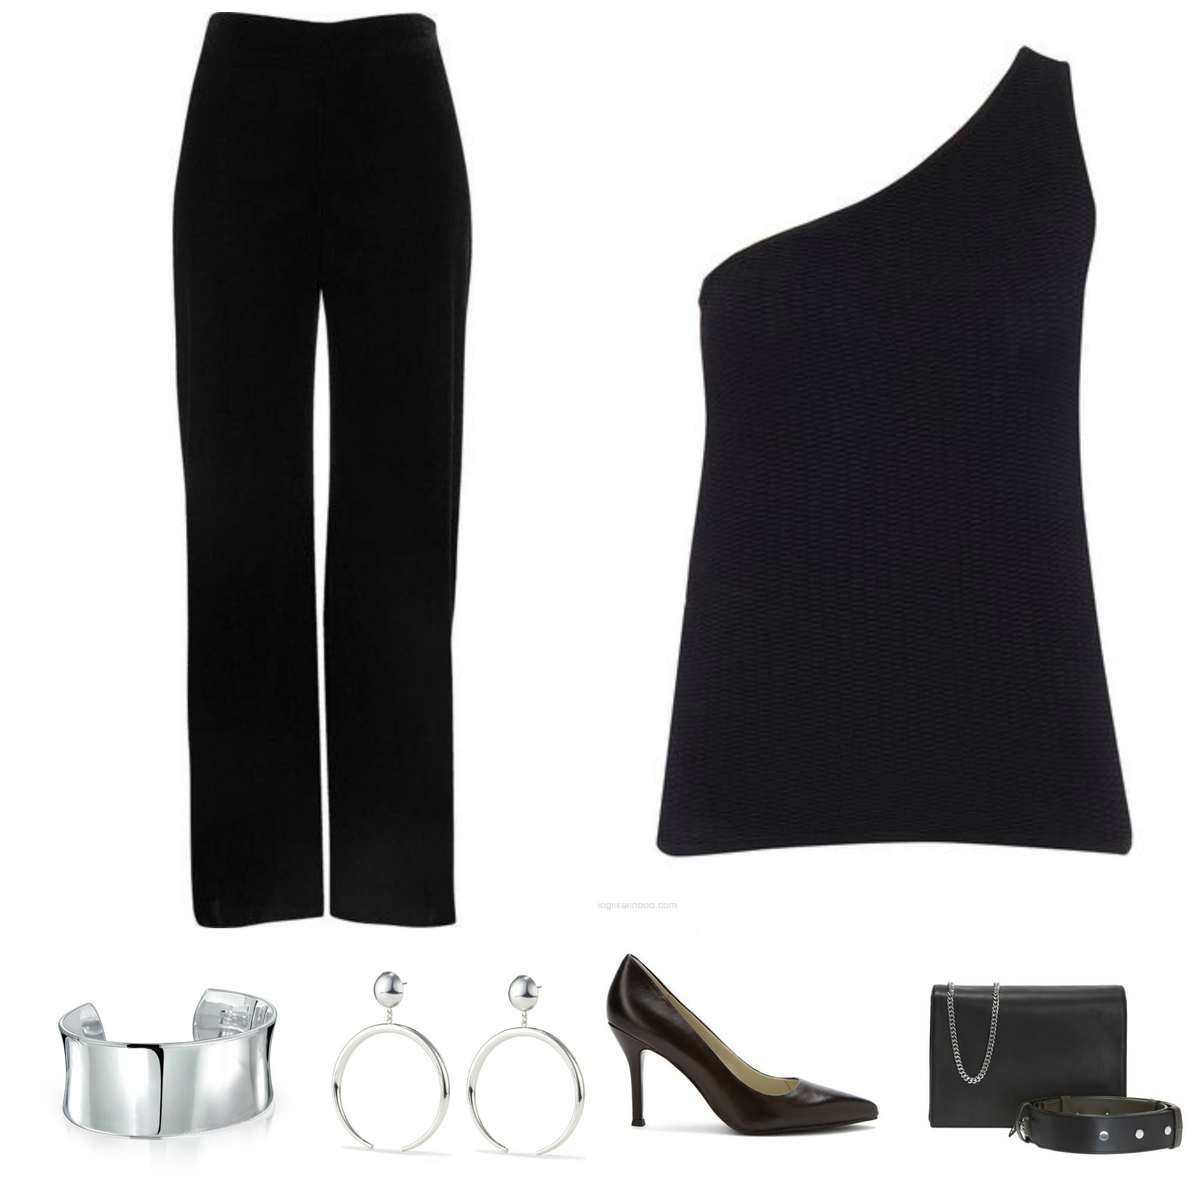 Image is of a black one shouldered sweater, black pants, silver cuff bracelet and statement earrings, black pumps, and a black handbag from ALLSAINTS